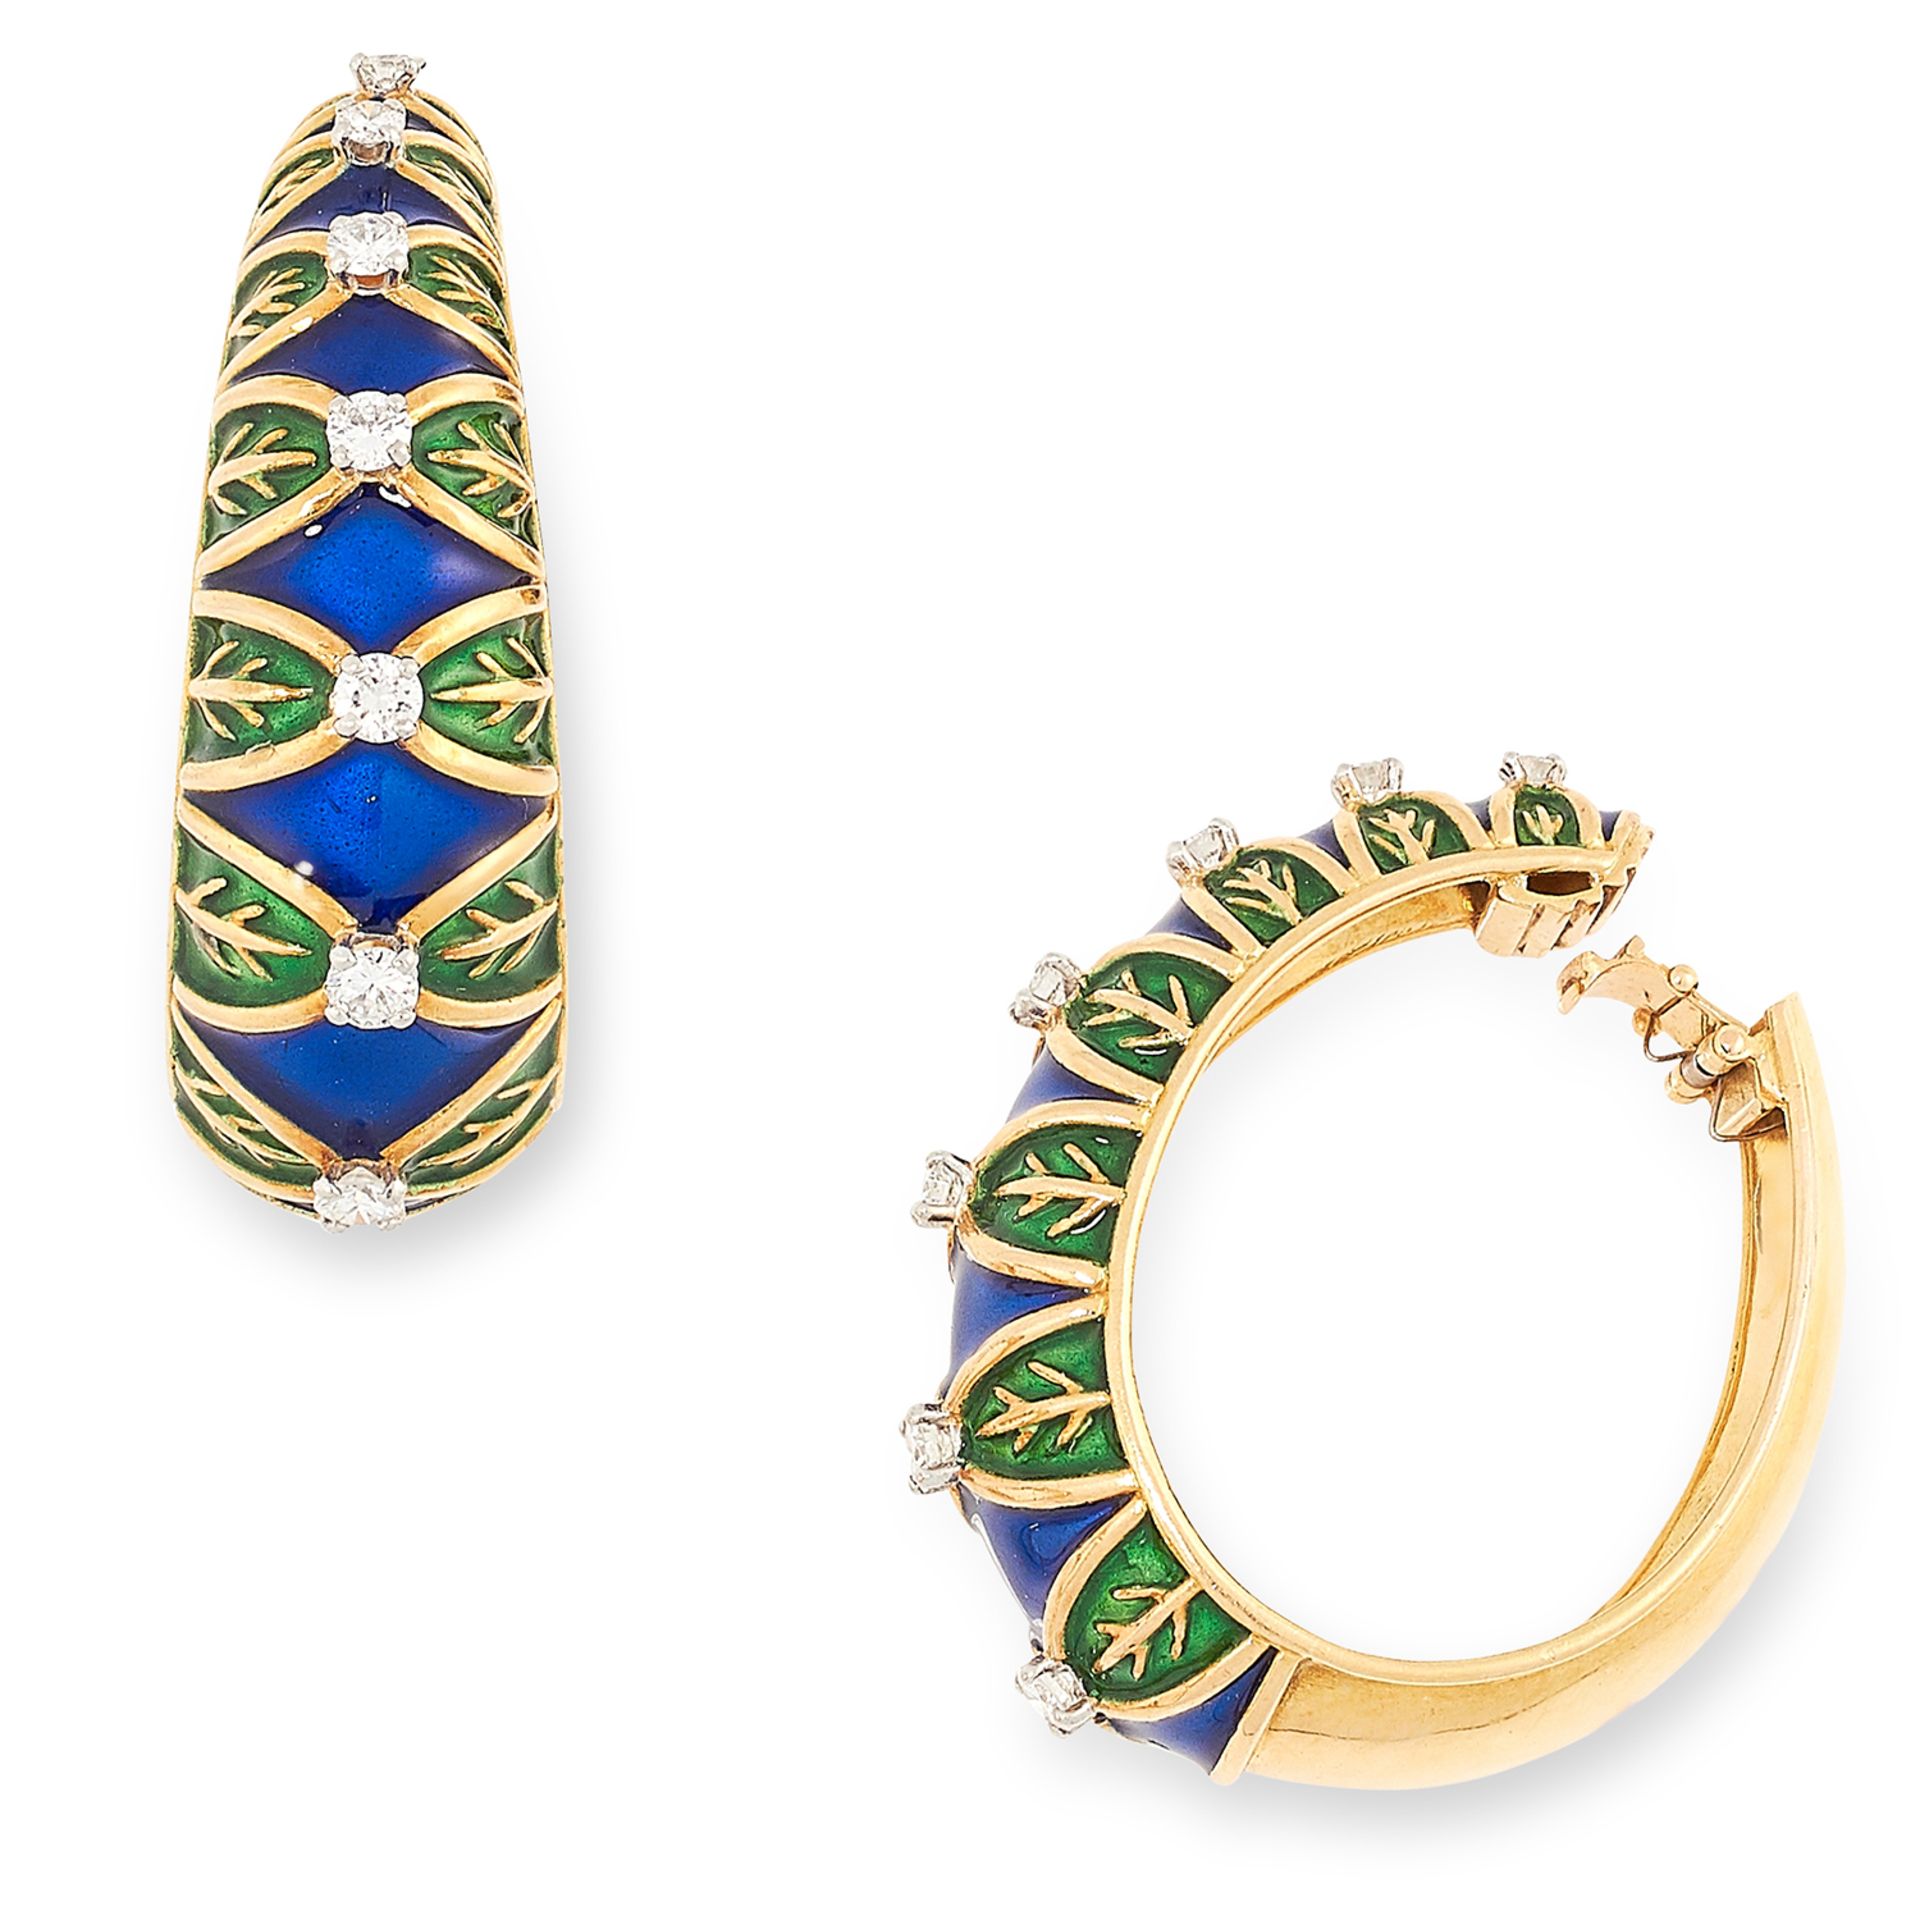 A PAIR OF DIAMOND AND ENAMEL HOOP EARRINGS set with round cut diamonds within blue and green